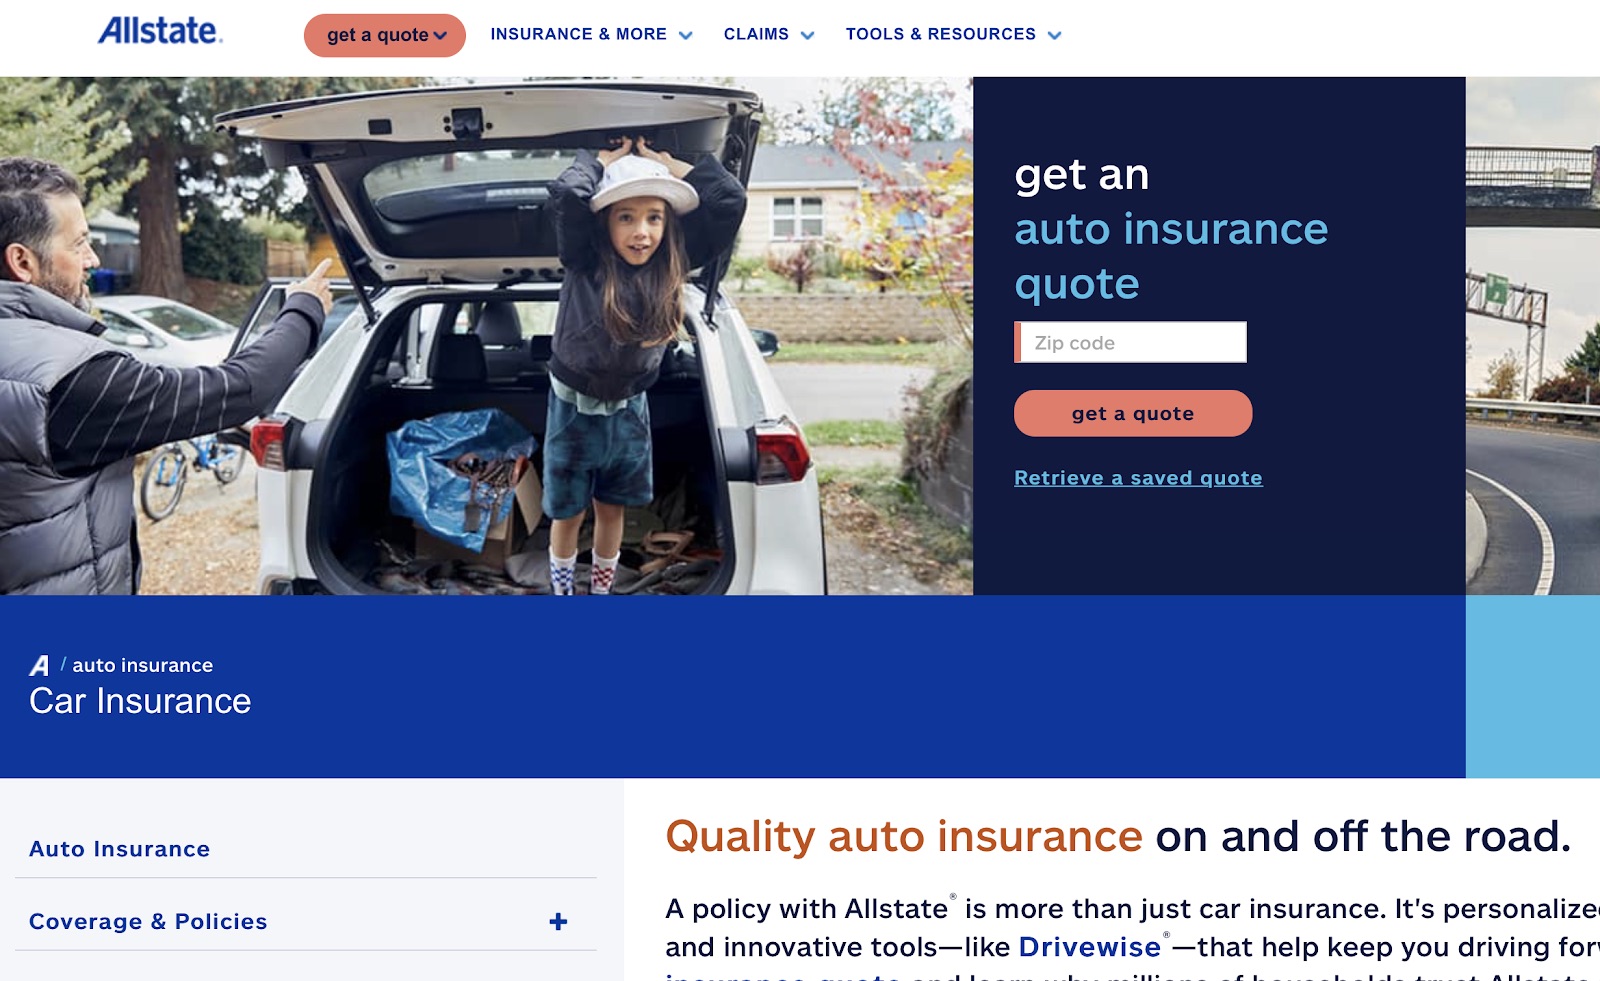 Allstate landing page example